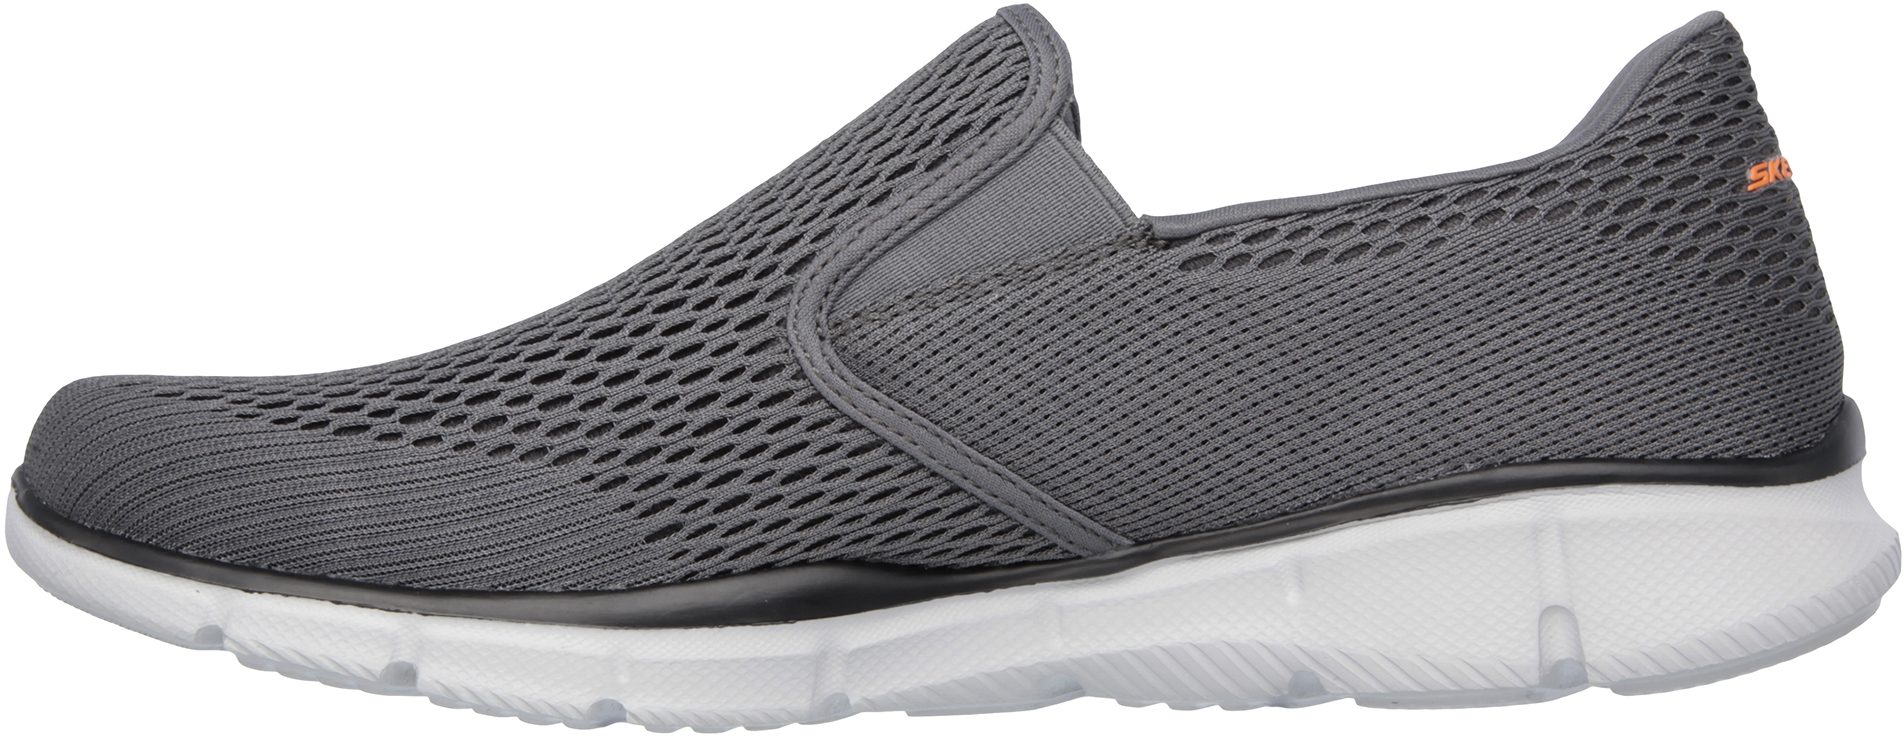 Skechers Equalizer - Double Play Charcoal / Orange 51509 CCOR ...